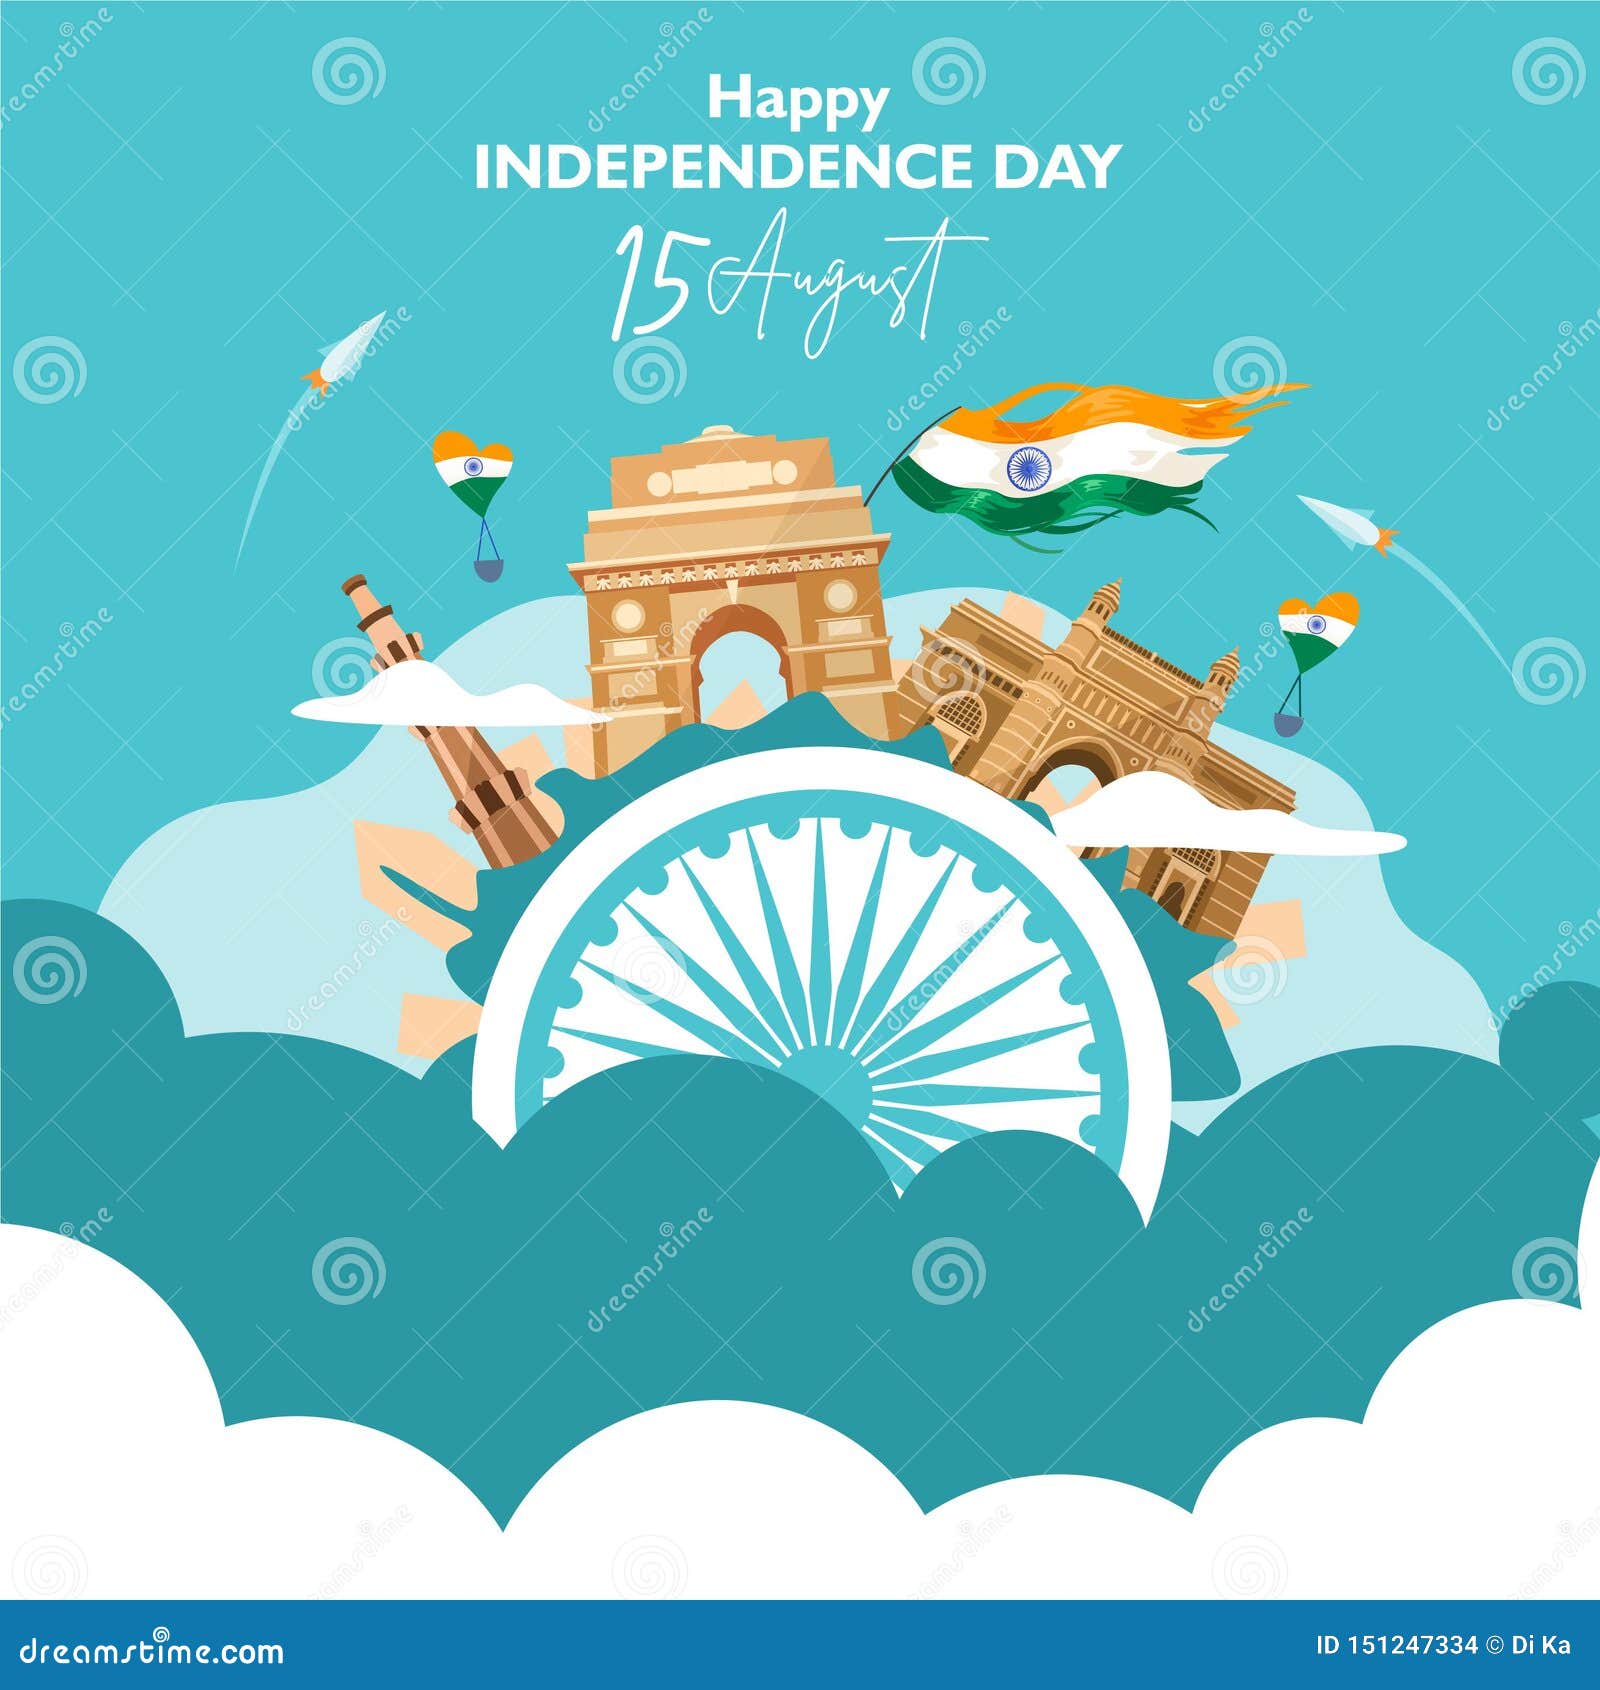 Happy Independence Day India 15 August For Flyer Poster Banner Background Design With Concept The Heritage Building Composit Stock Vector Illustration Of Festival Creative 151247334